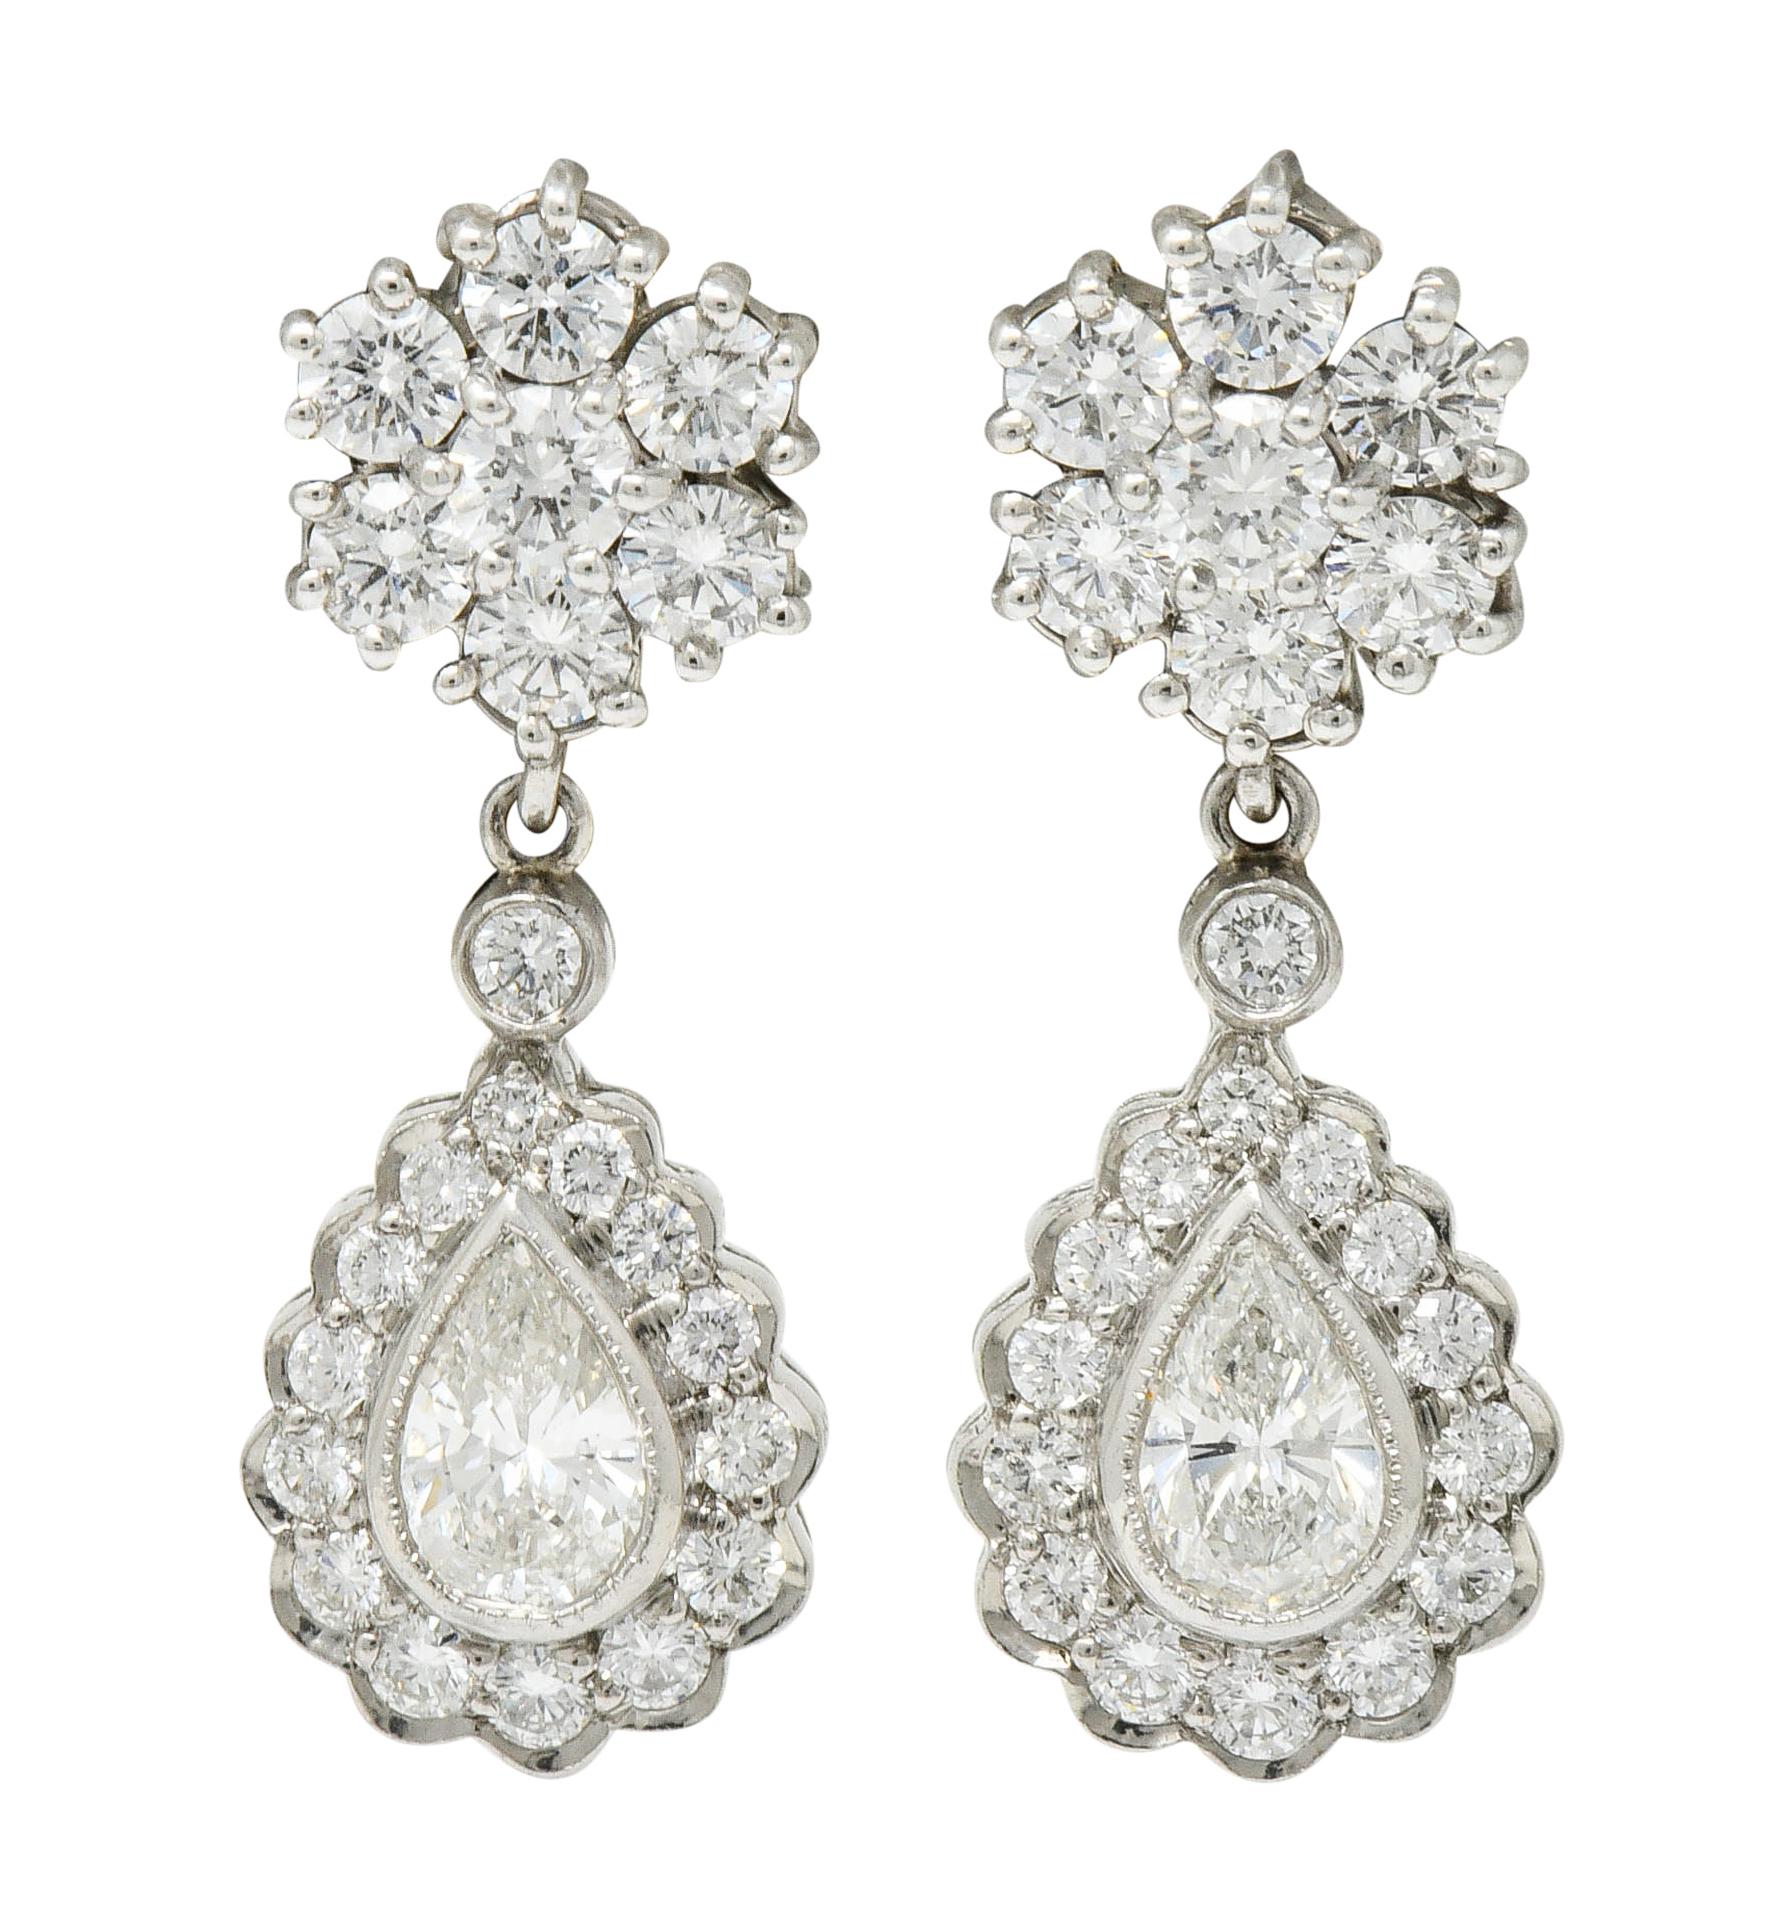 Earrings are designed as clustered diamond stud surmounts with two optional drops

Drops center either a pear cut diamond or a pear cut aquamarine; both surrounded by diamonds

Aquamarine weigh in total approximately 1.05 carats with a 0.95 carat of